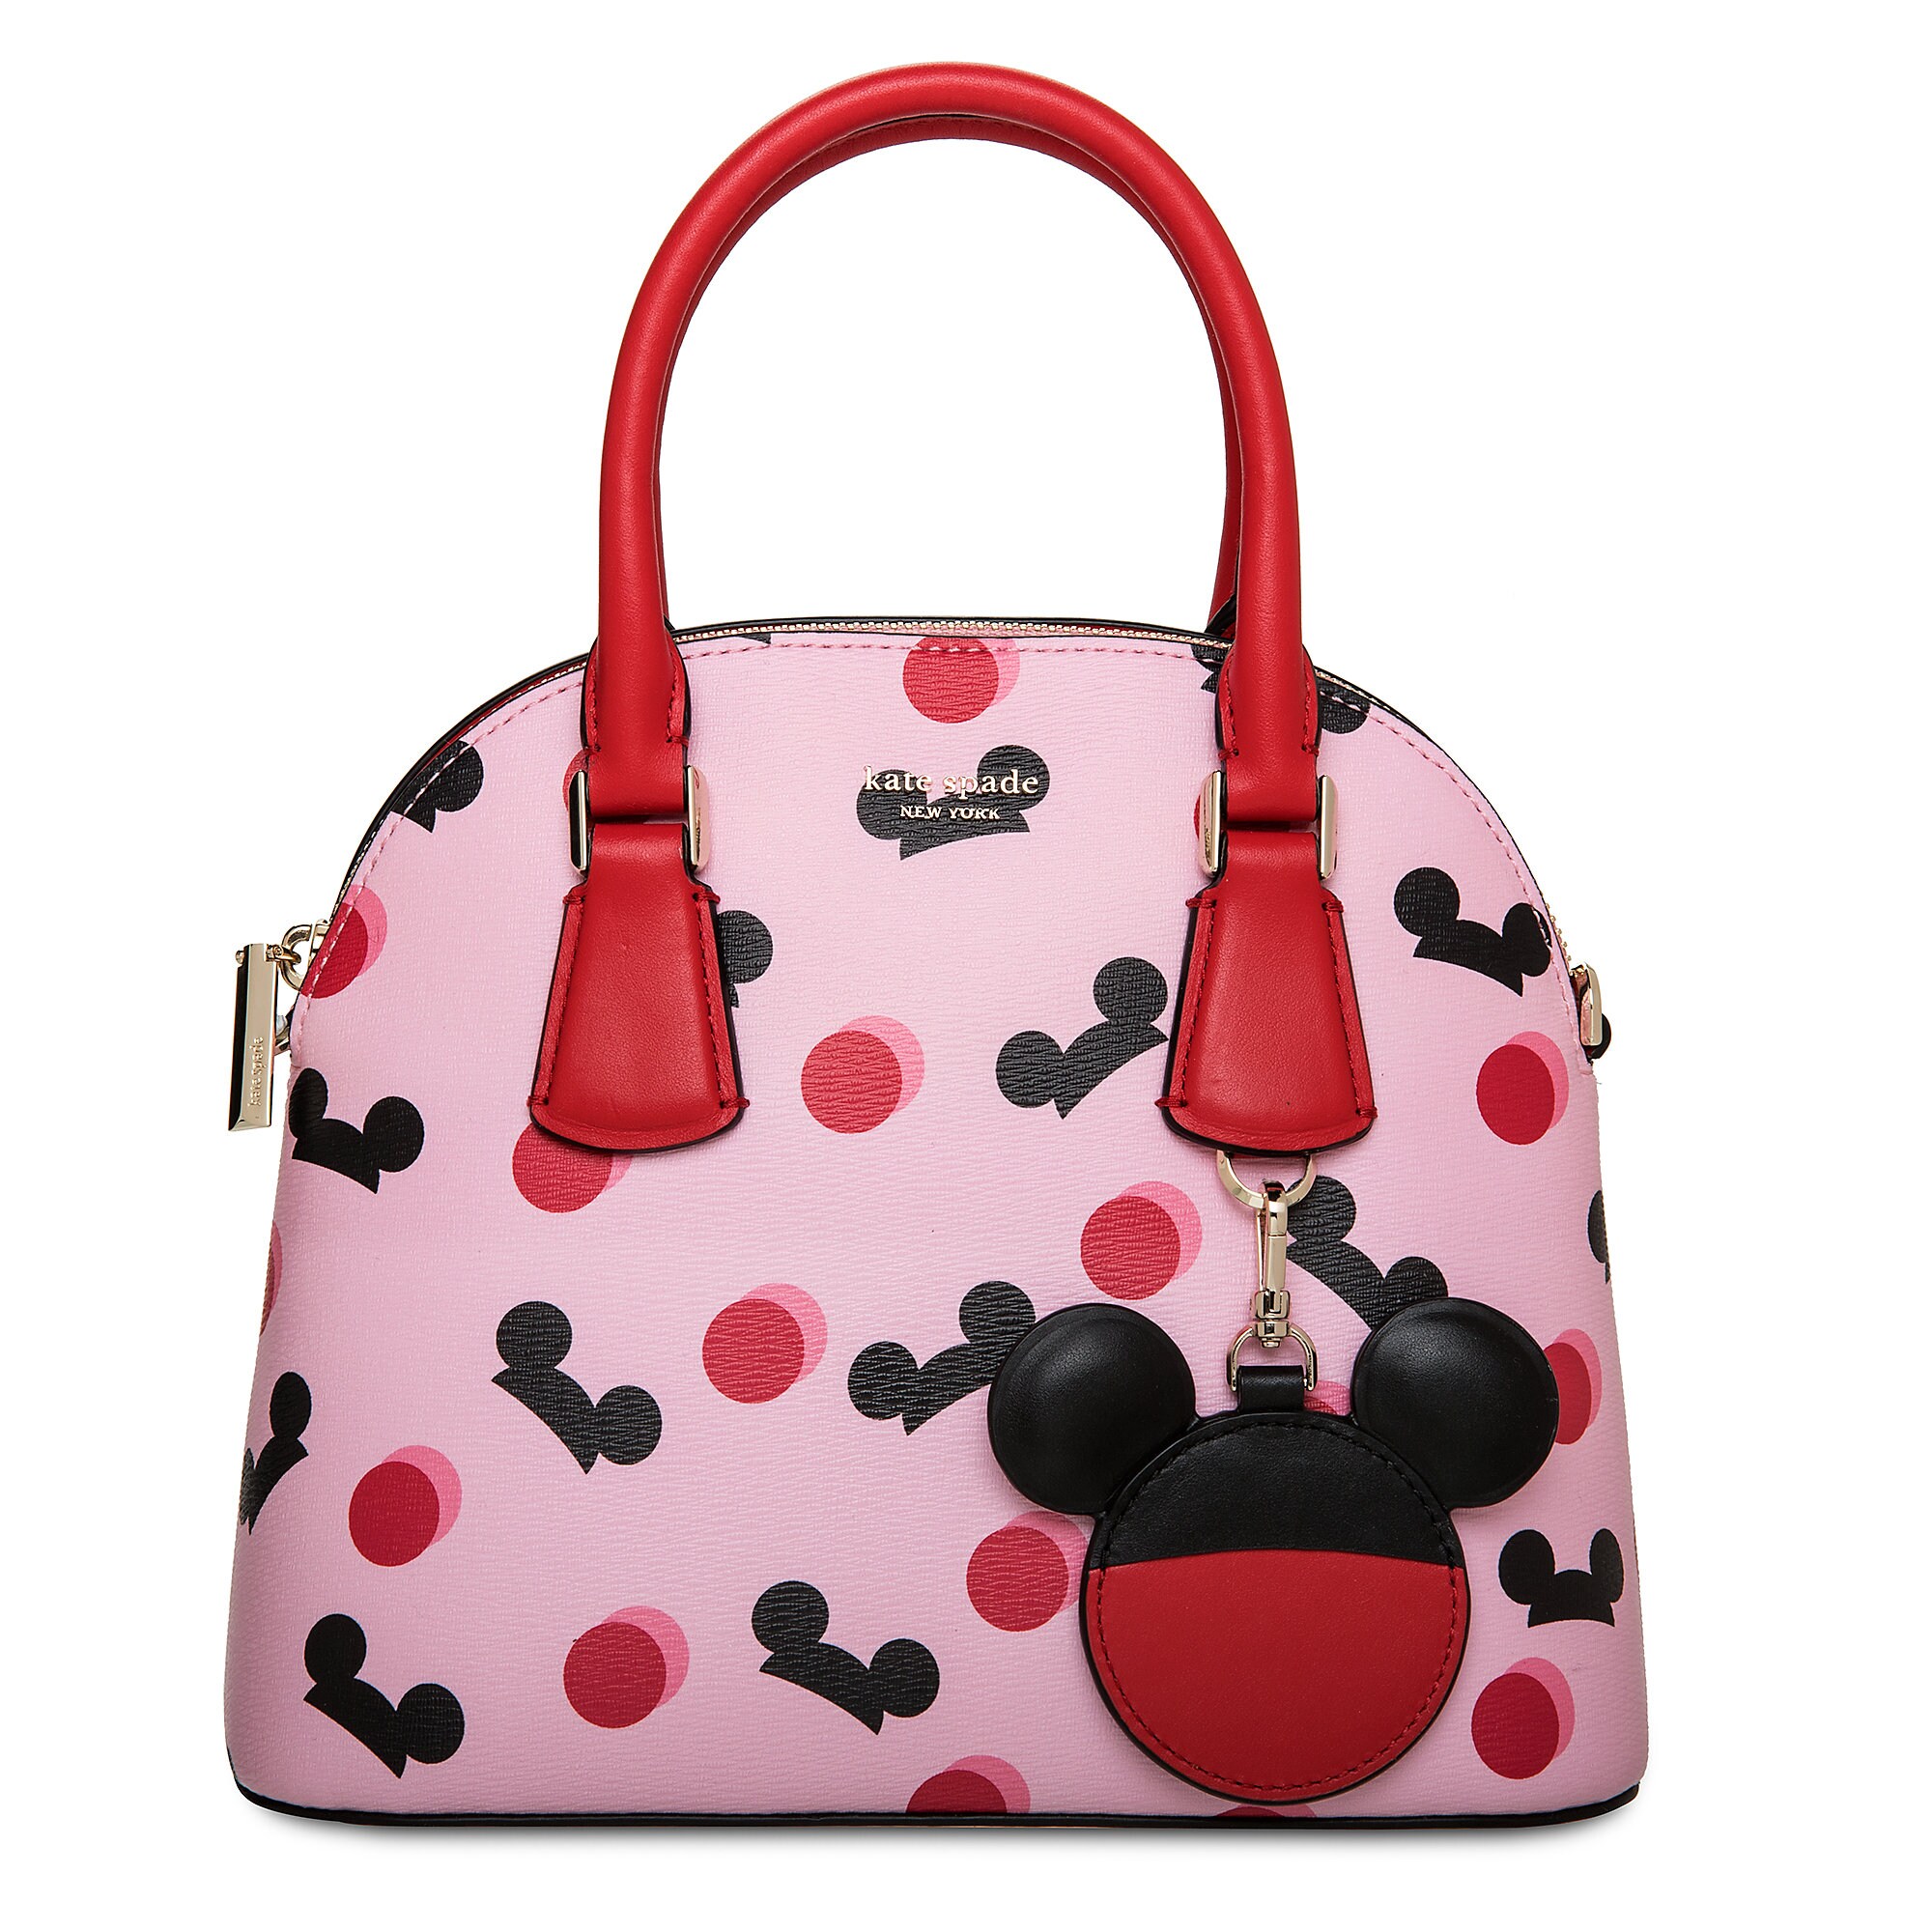 Mickey Mouse Ear Hat Satchel by kate spade new york - Small - Pink